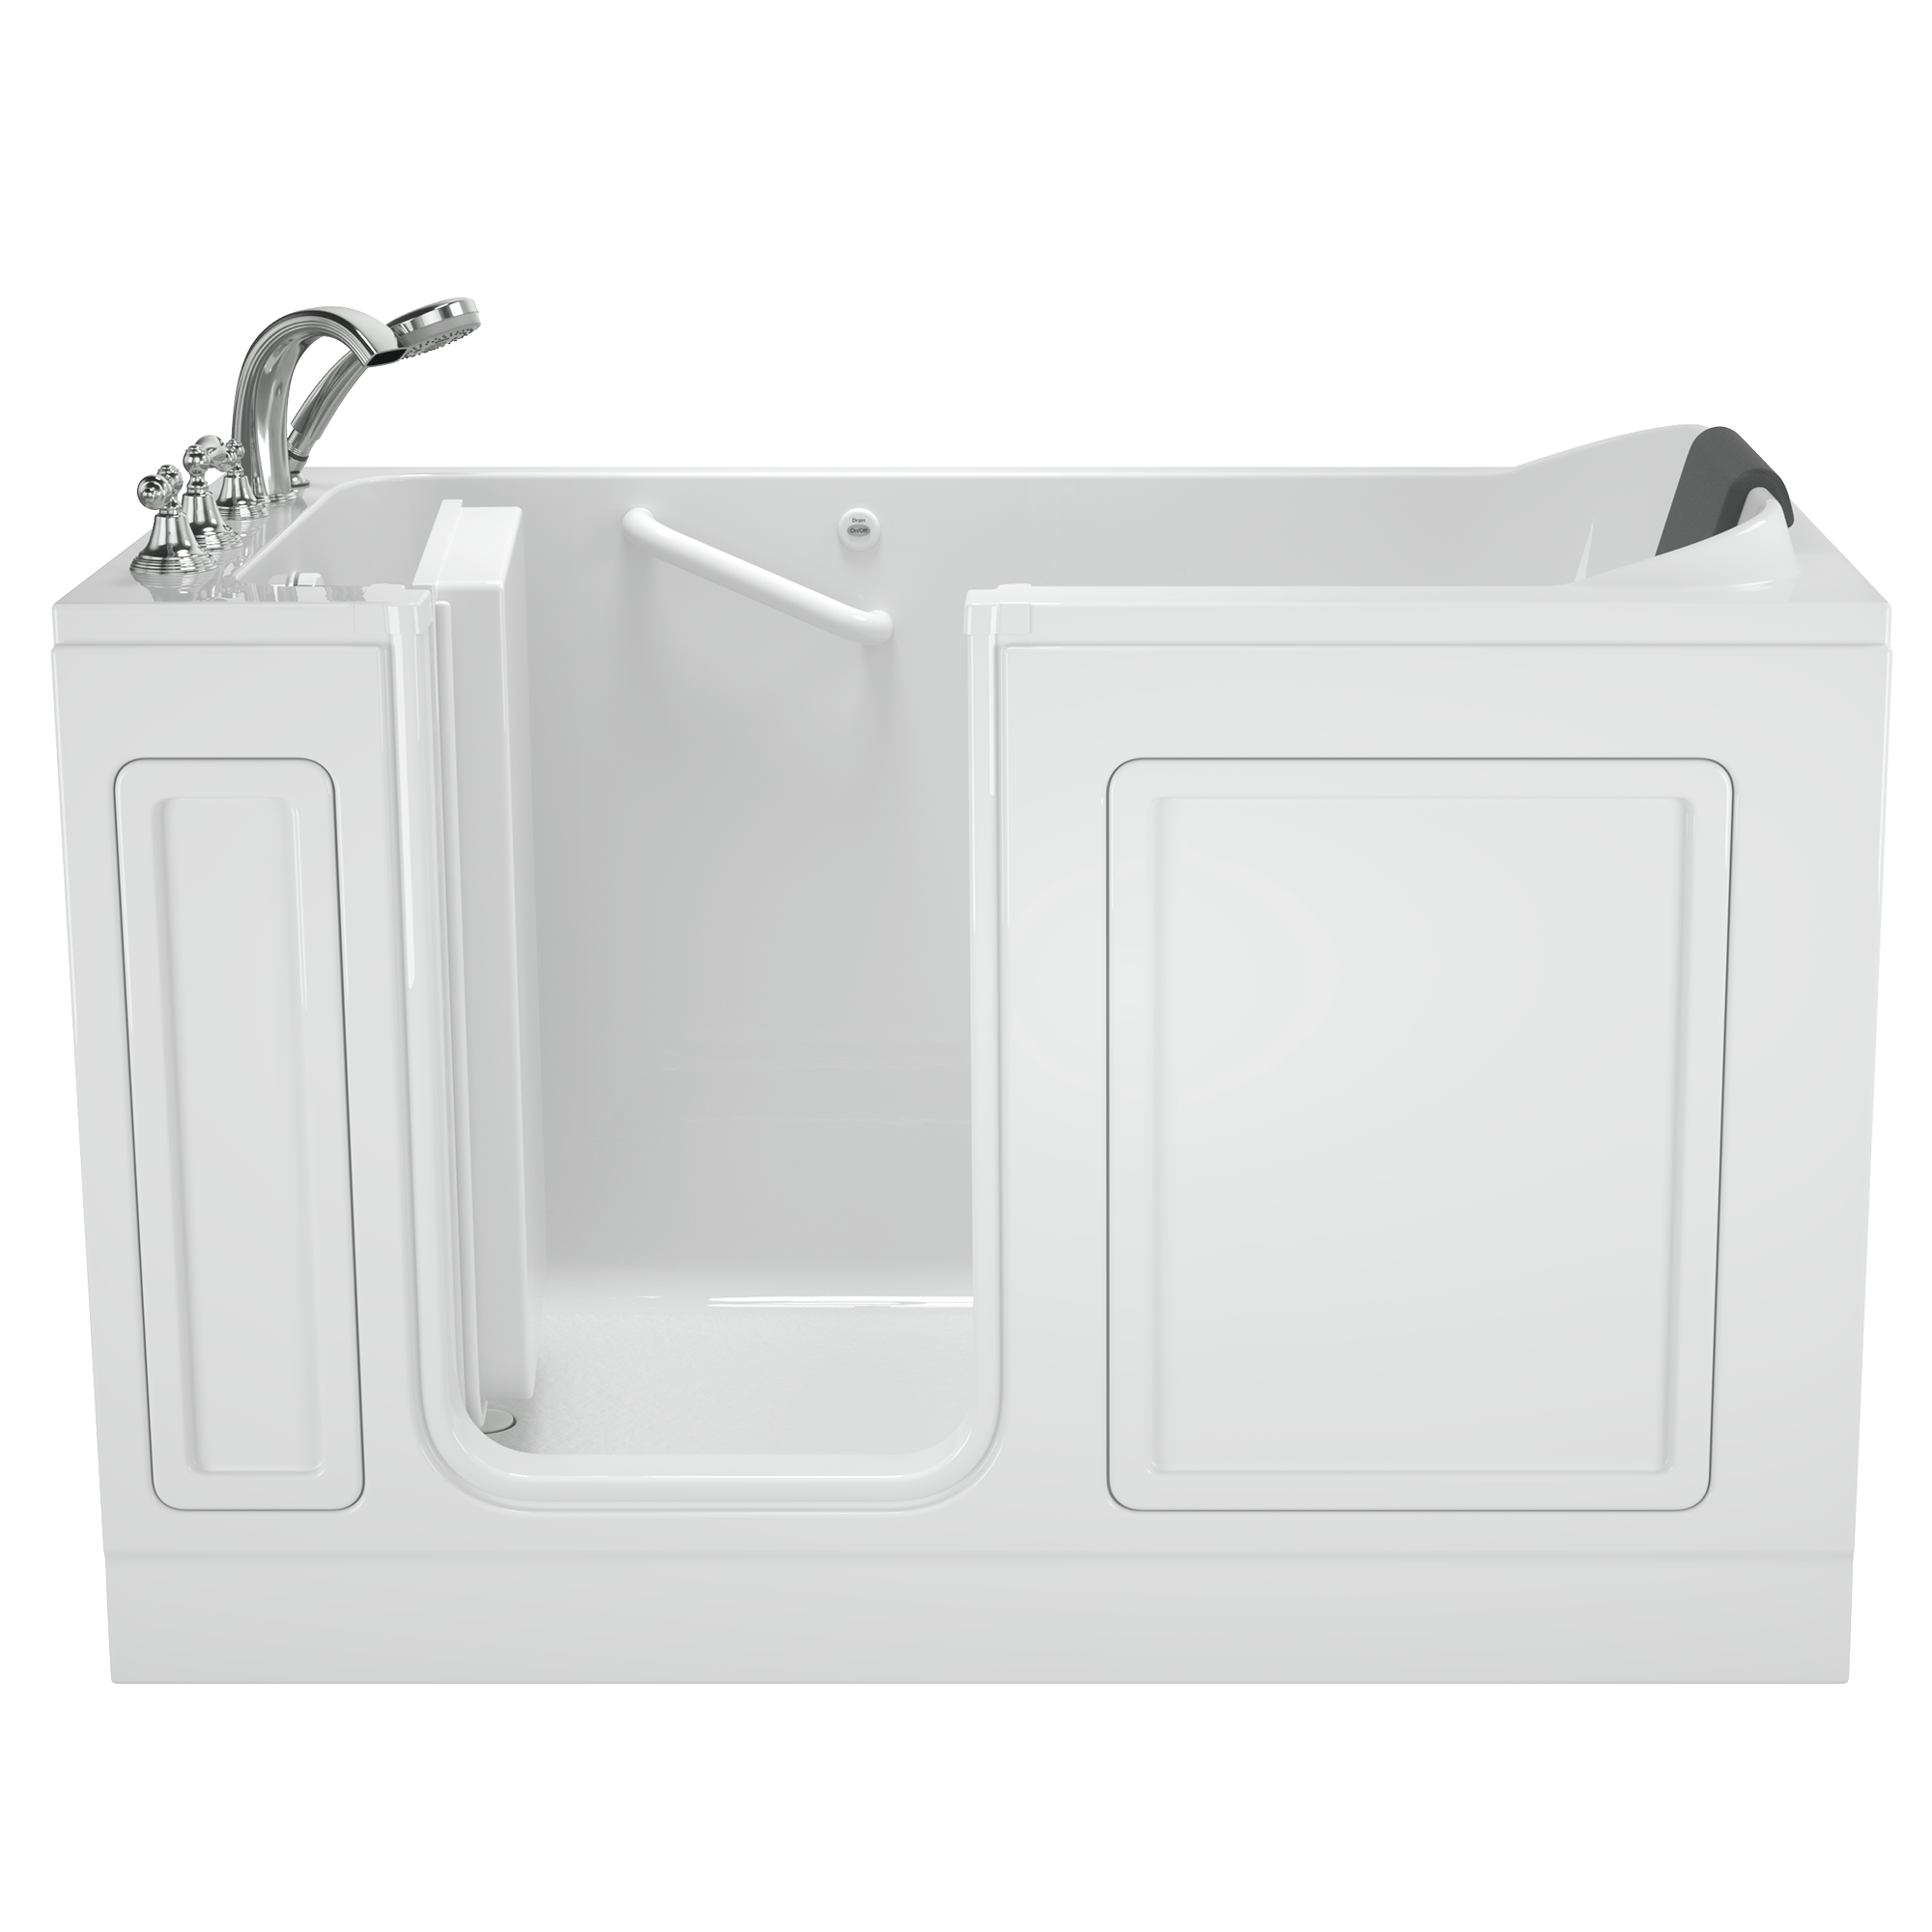 Acrylic Luxury Series 32 x 60 -Inch Walk-in Tub With Soaker System -  Left-Hand Drain With Faucet